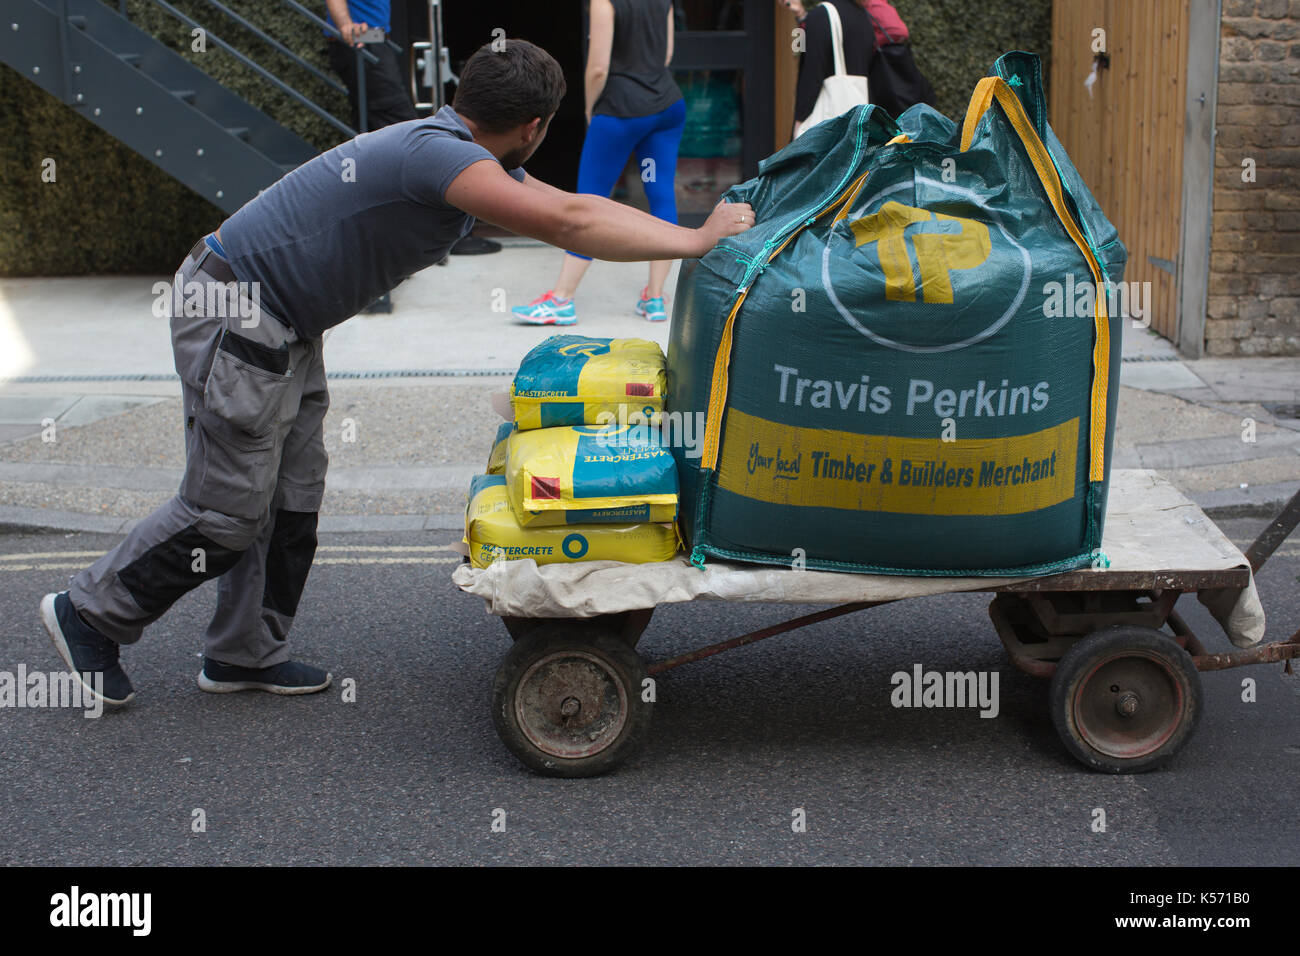 Man pushing trolley with Travis Perkins Timber & Builders Merchant cement and sand for construction, central London, UK Stock Photo